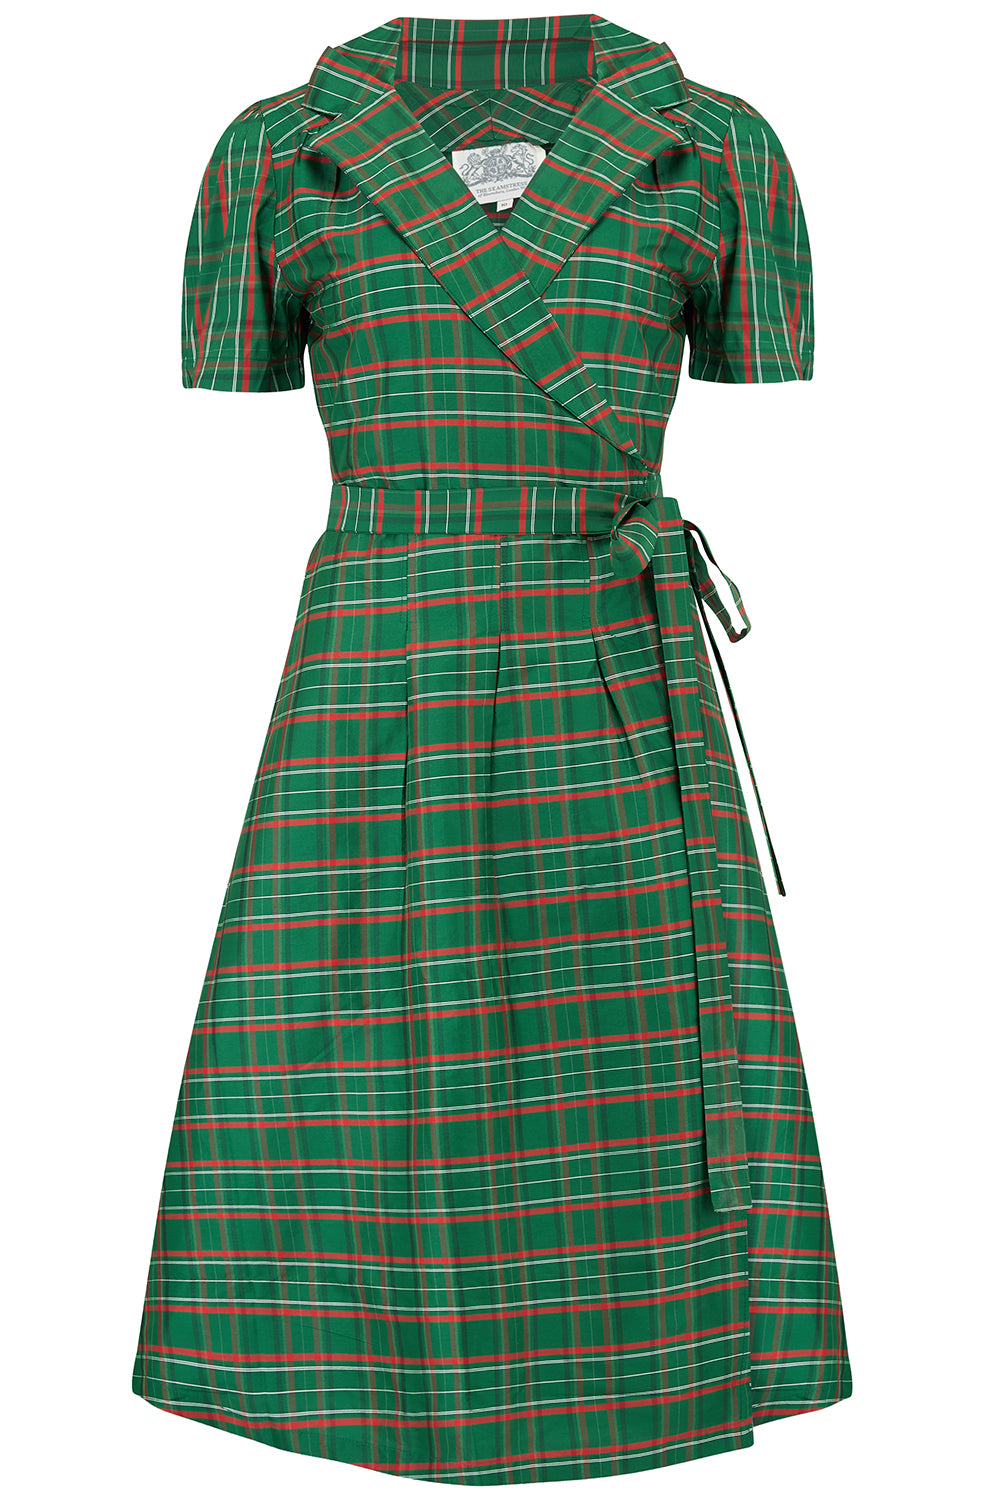 "Peggy" Wrap Dress in Green Taffeta Tartan, Classic 1940s Vintage Style - True and authentic vintage style clothing, inspired by the Classic styles of CC41 , WW2 and the fun 1950s RocknRoll era, for everyday wear plus events like Goodwood Revival, Twinwood Festival and Viva Las Vegas Rockabilly Weekend Rock n Romance The Seamstress of Bloomsbury